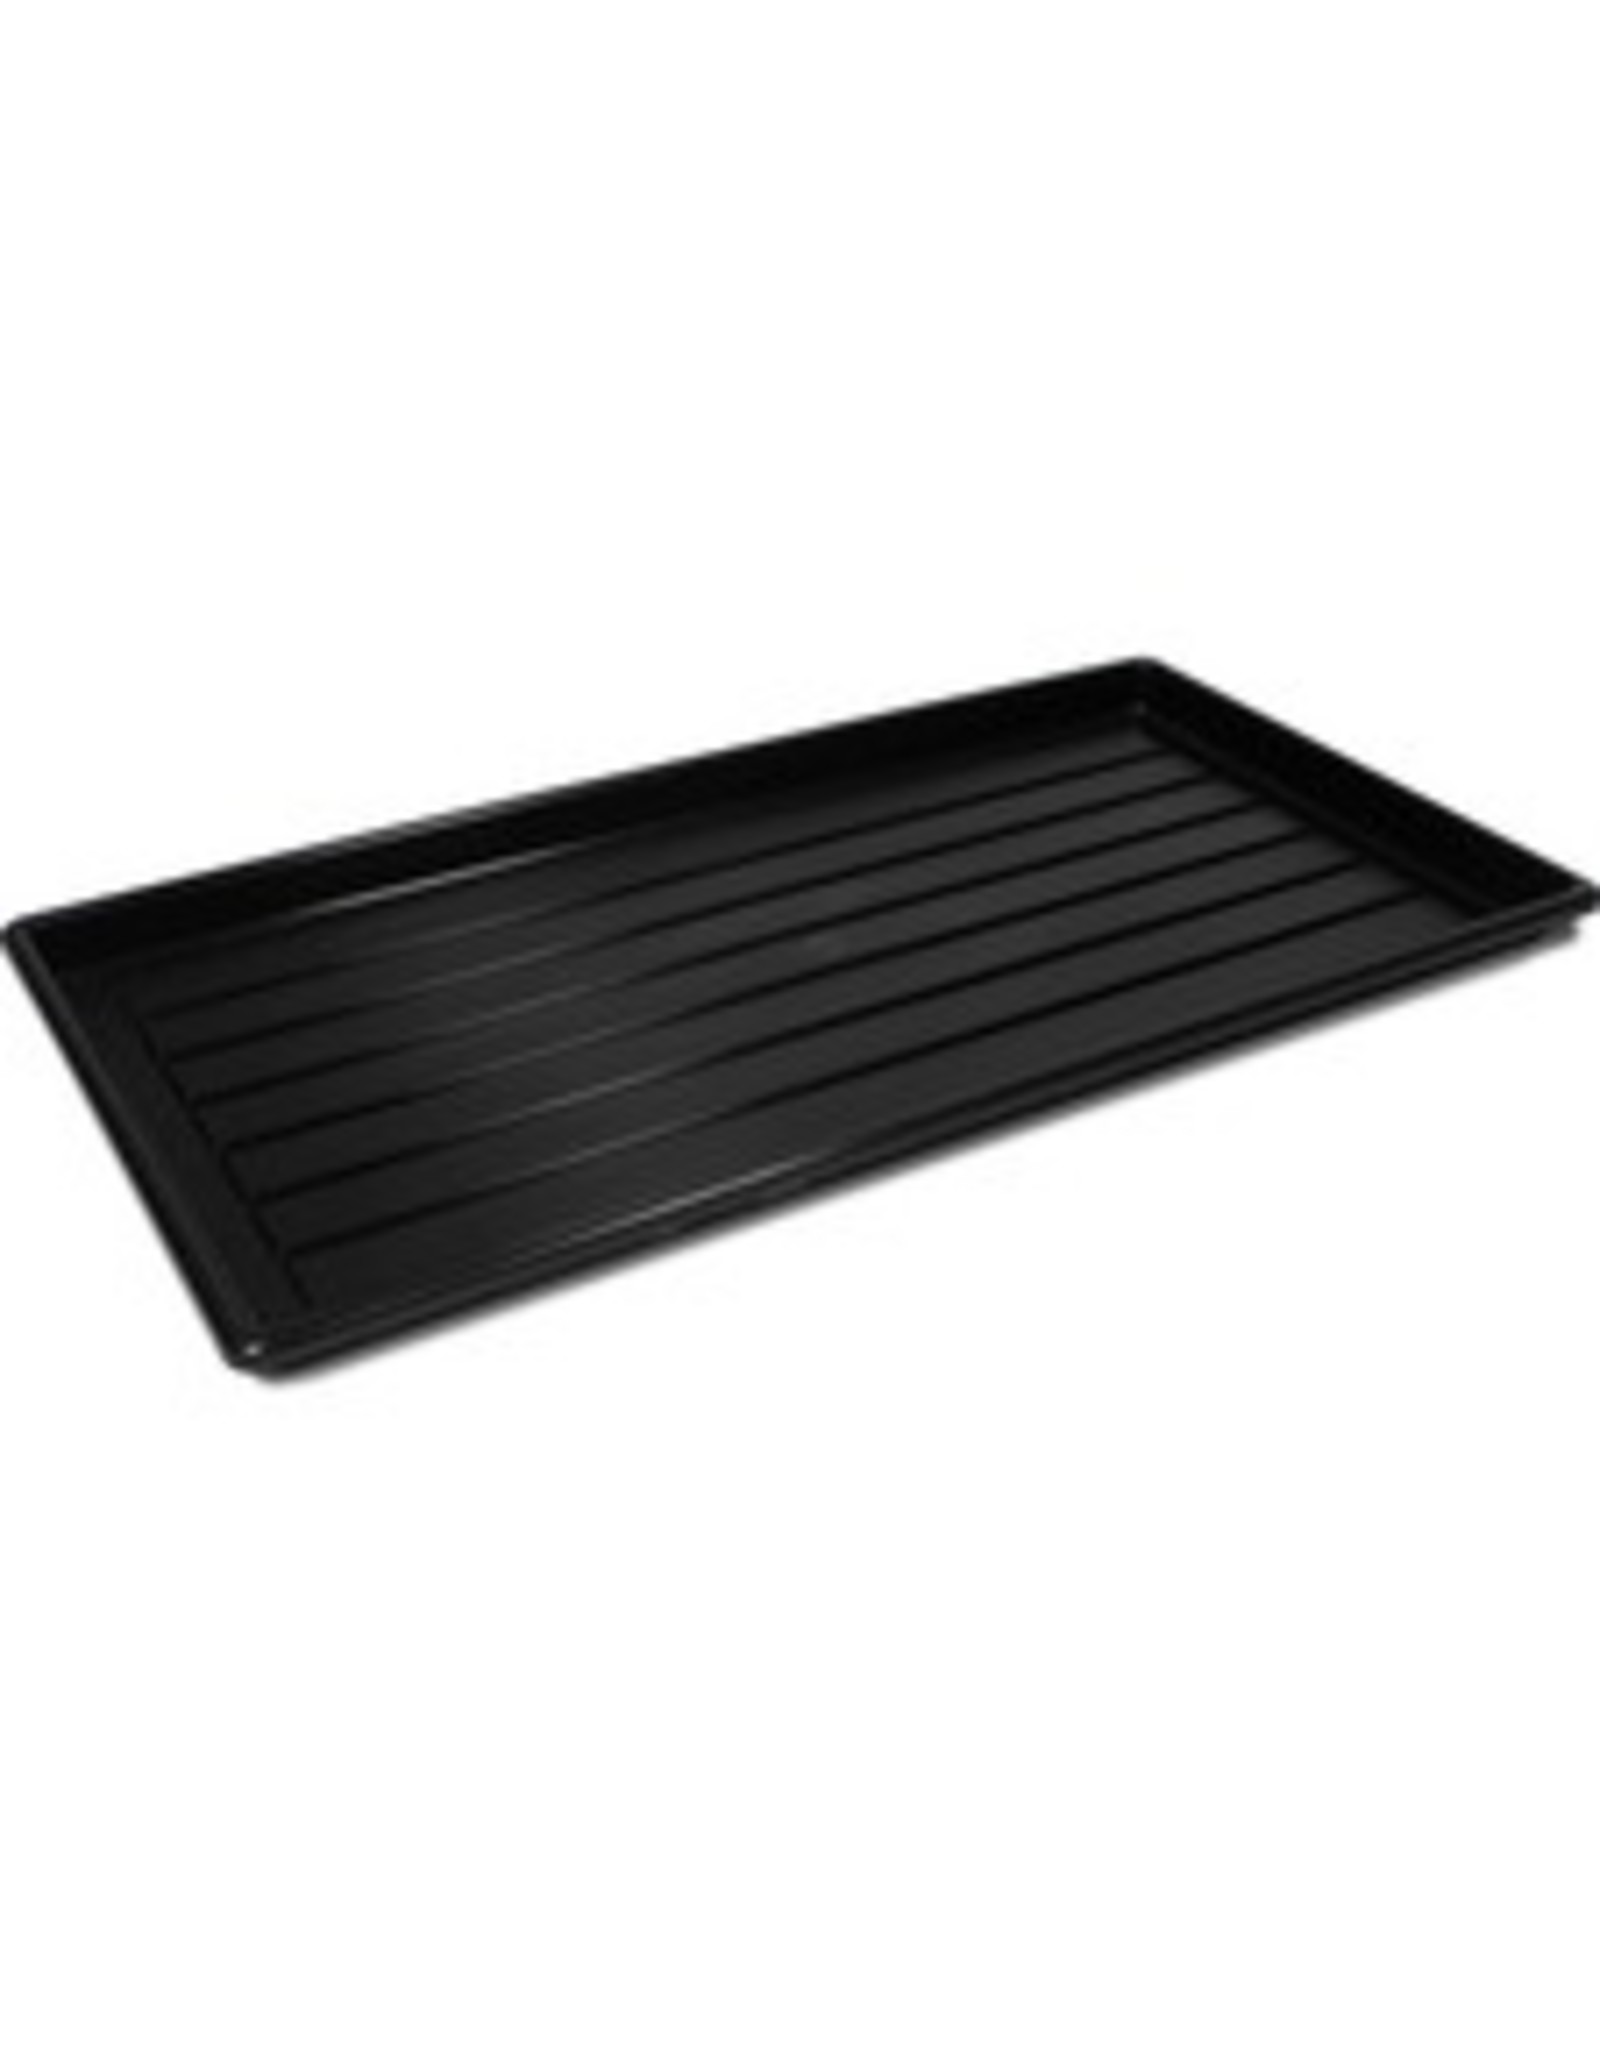 BOOT MAT RECYCLED BLACK